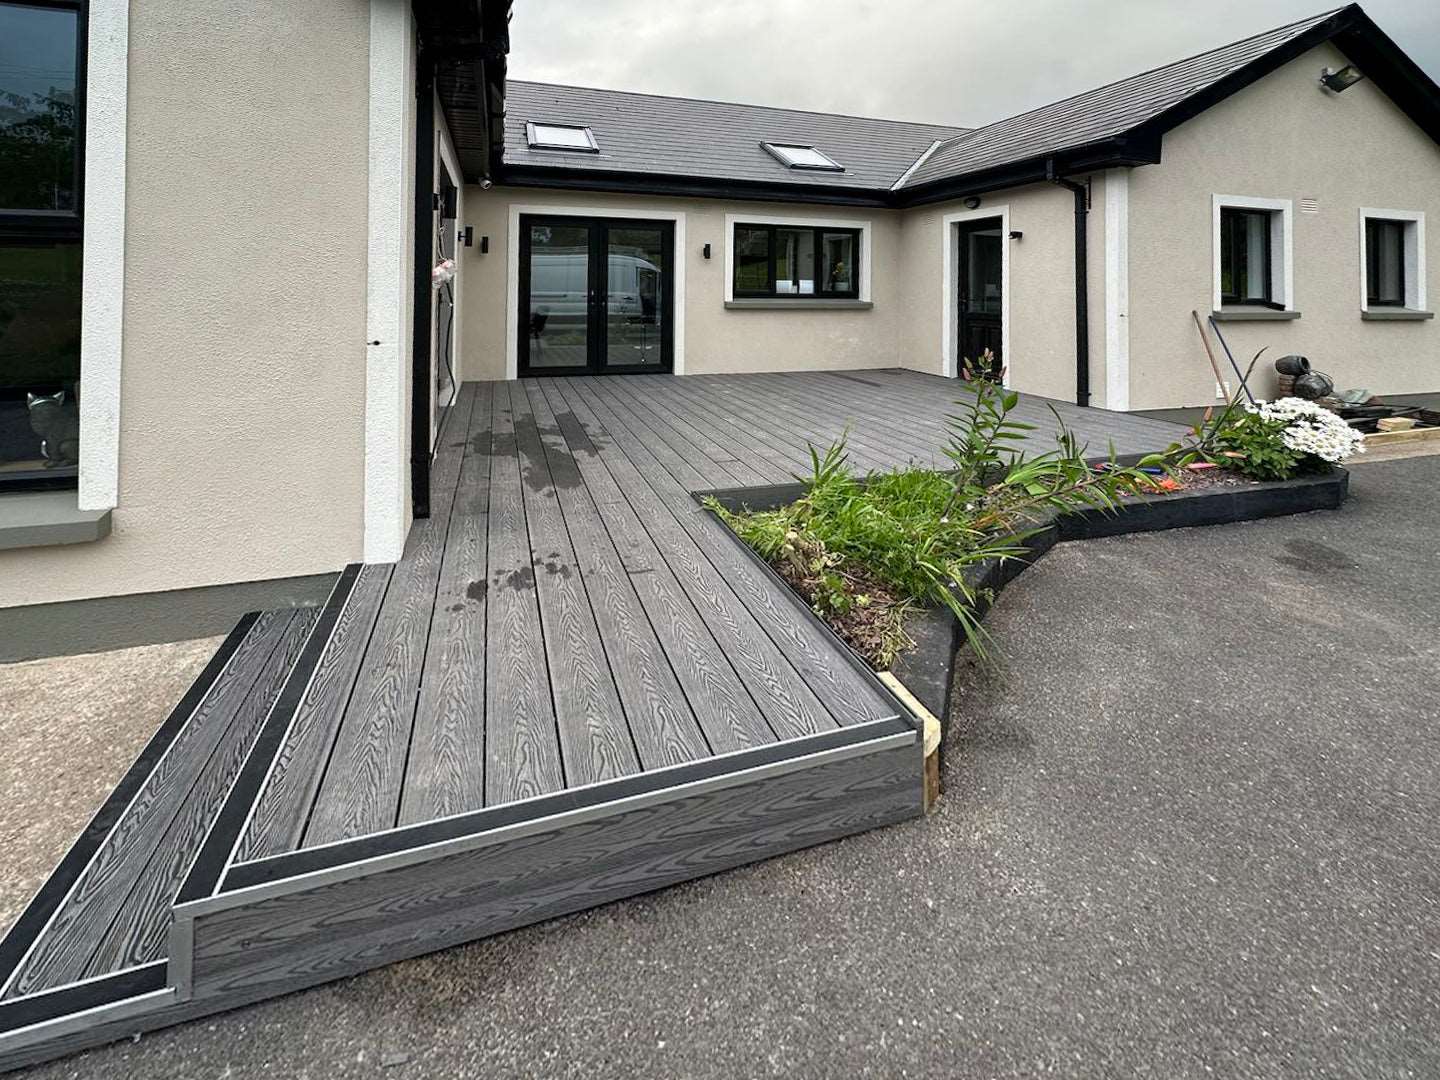 Aluminum Canopy, Composite Decking manufacturers and installers in Ireland